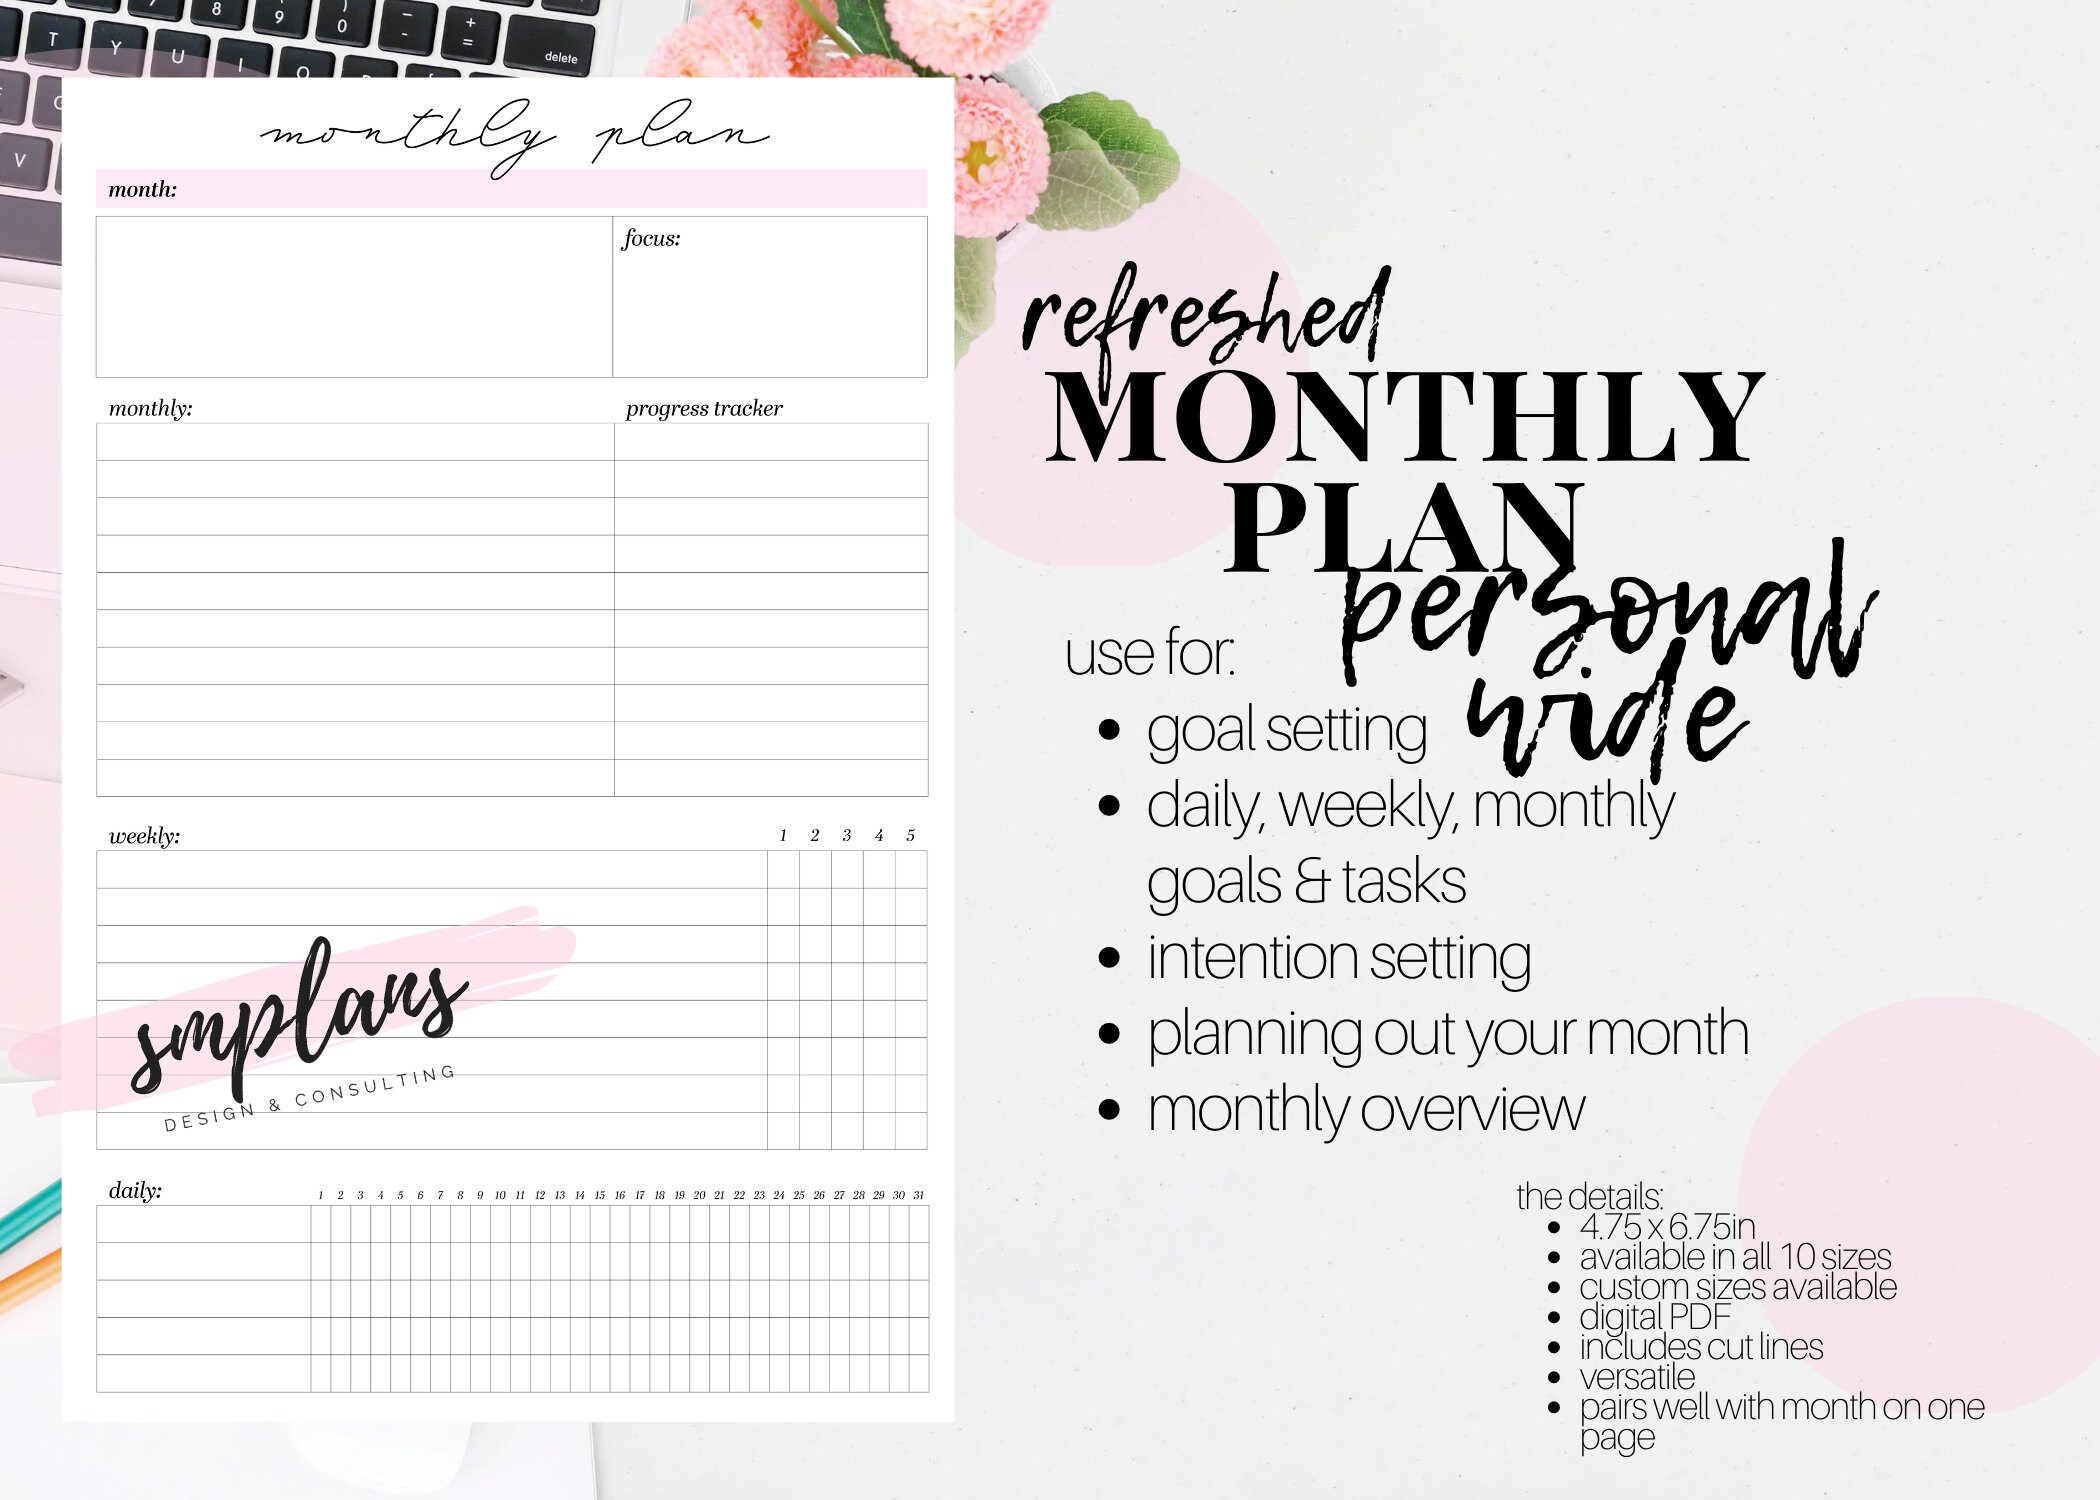 Monthly Plan Monthly Goals Monthly Overview Personal Wide | Etsy